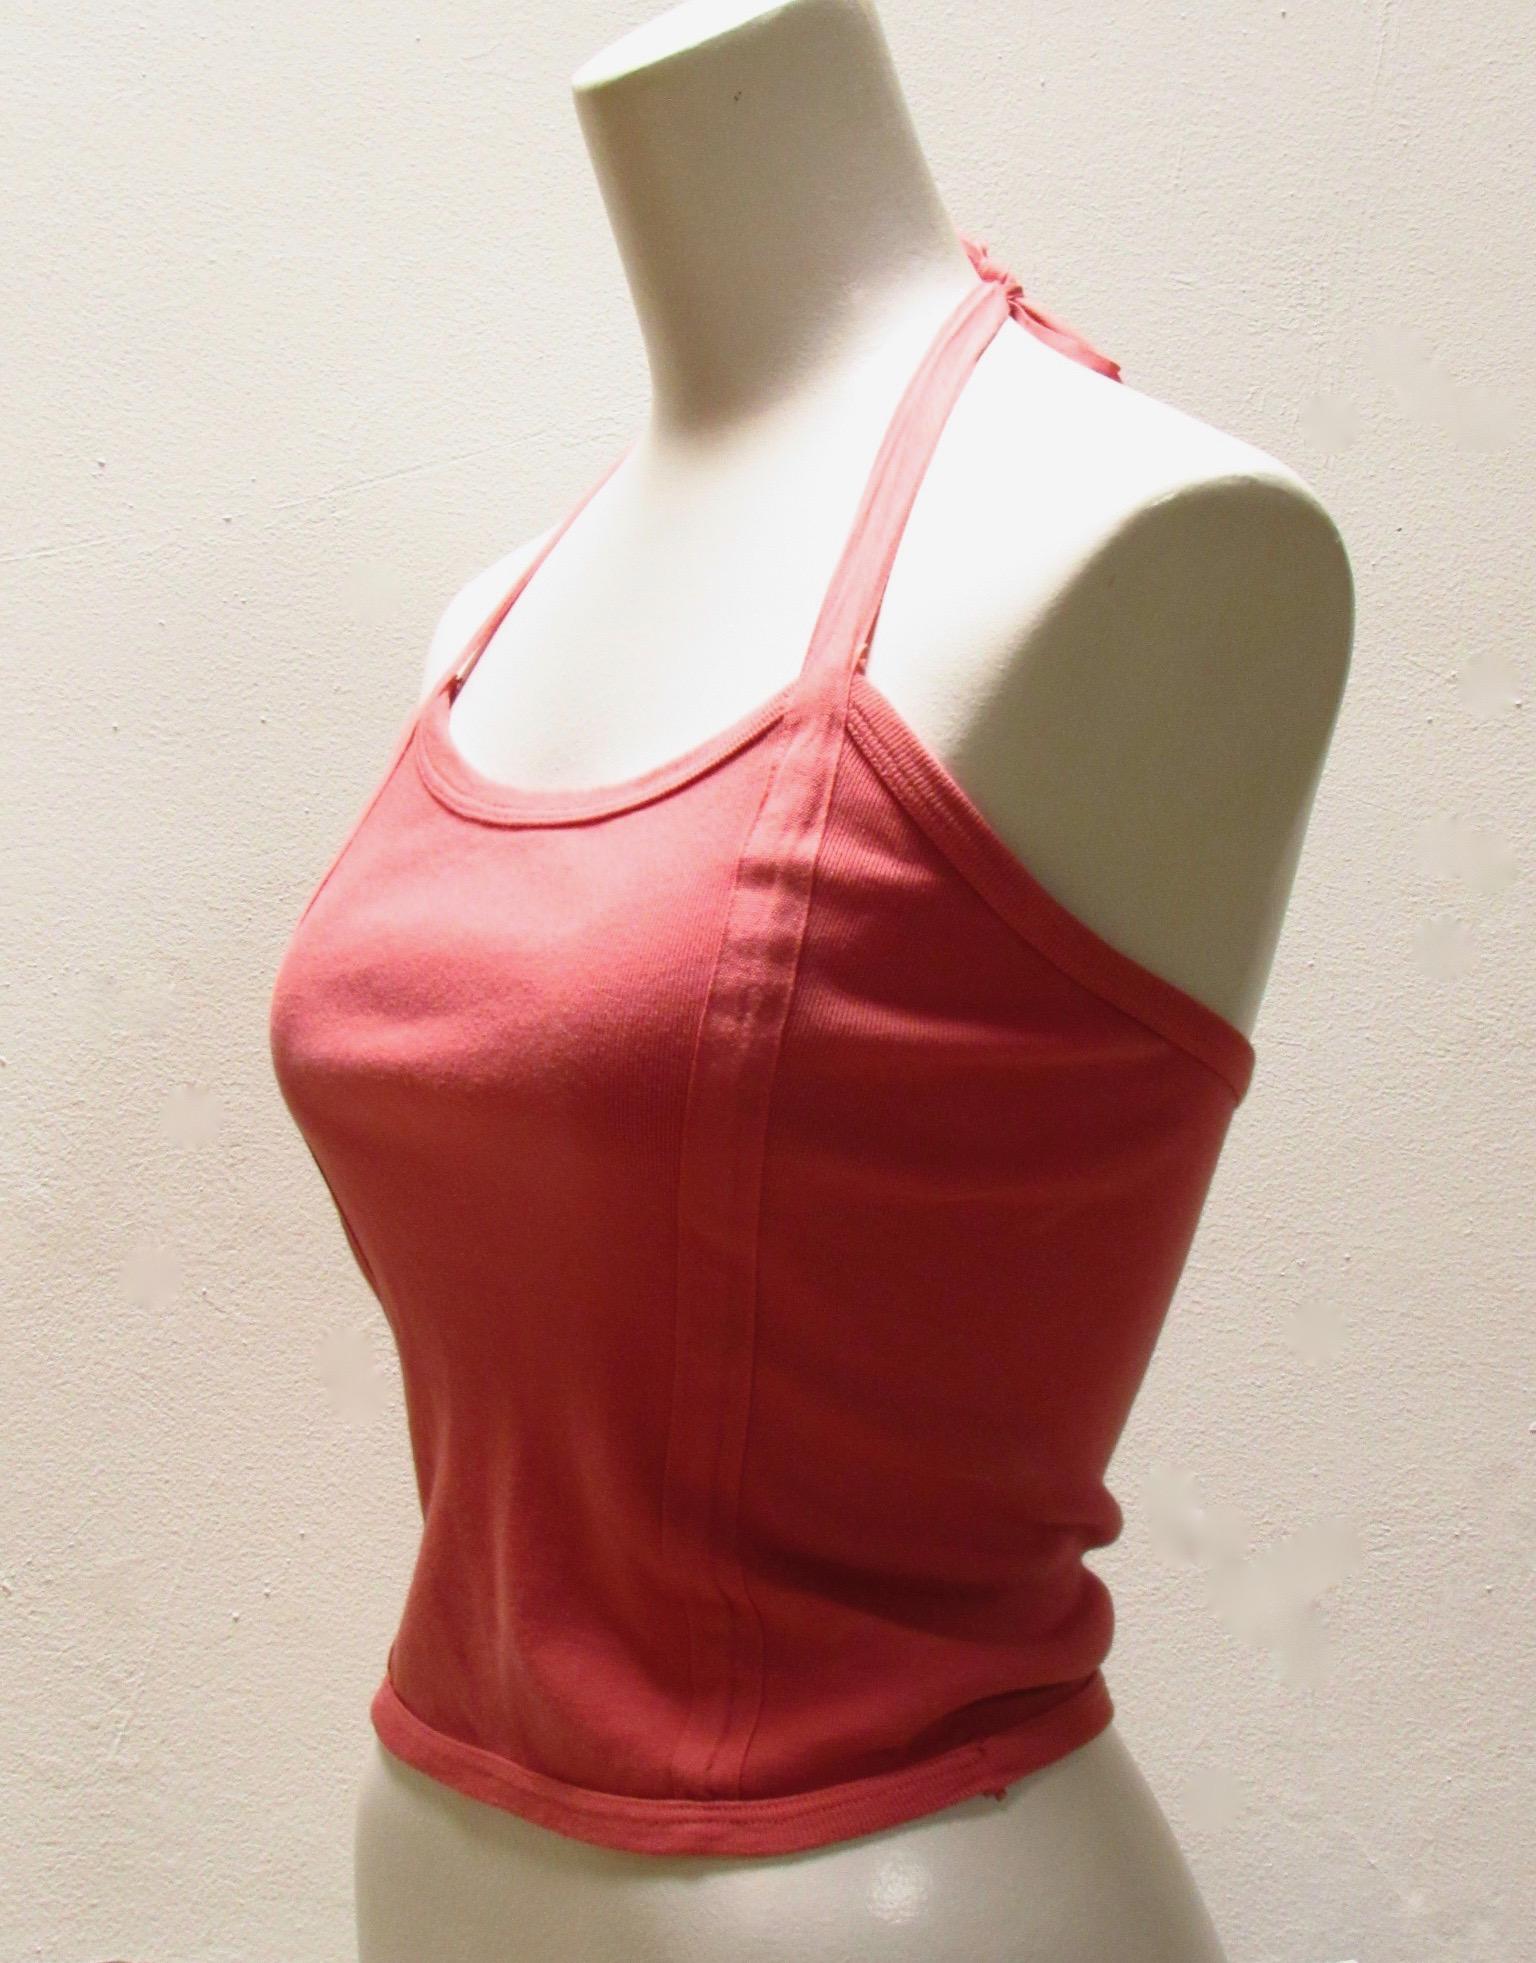 Vintage Maison Martin Margiela halter style top ties behind neck with self-ties that run the length of the front. Soft coral cotton falls to natural waist.